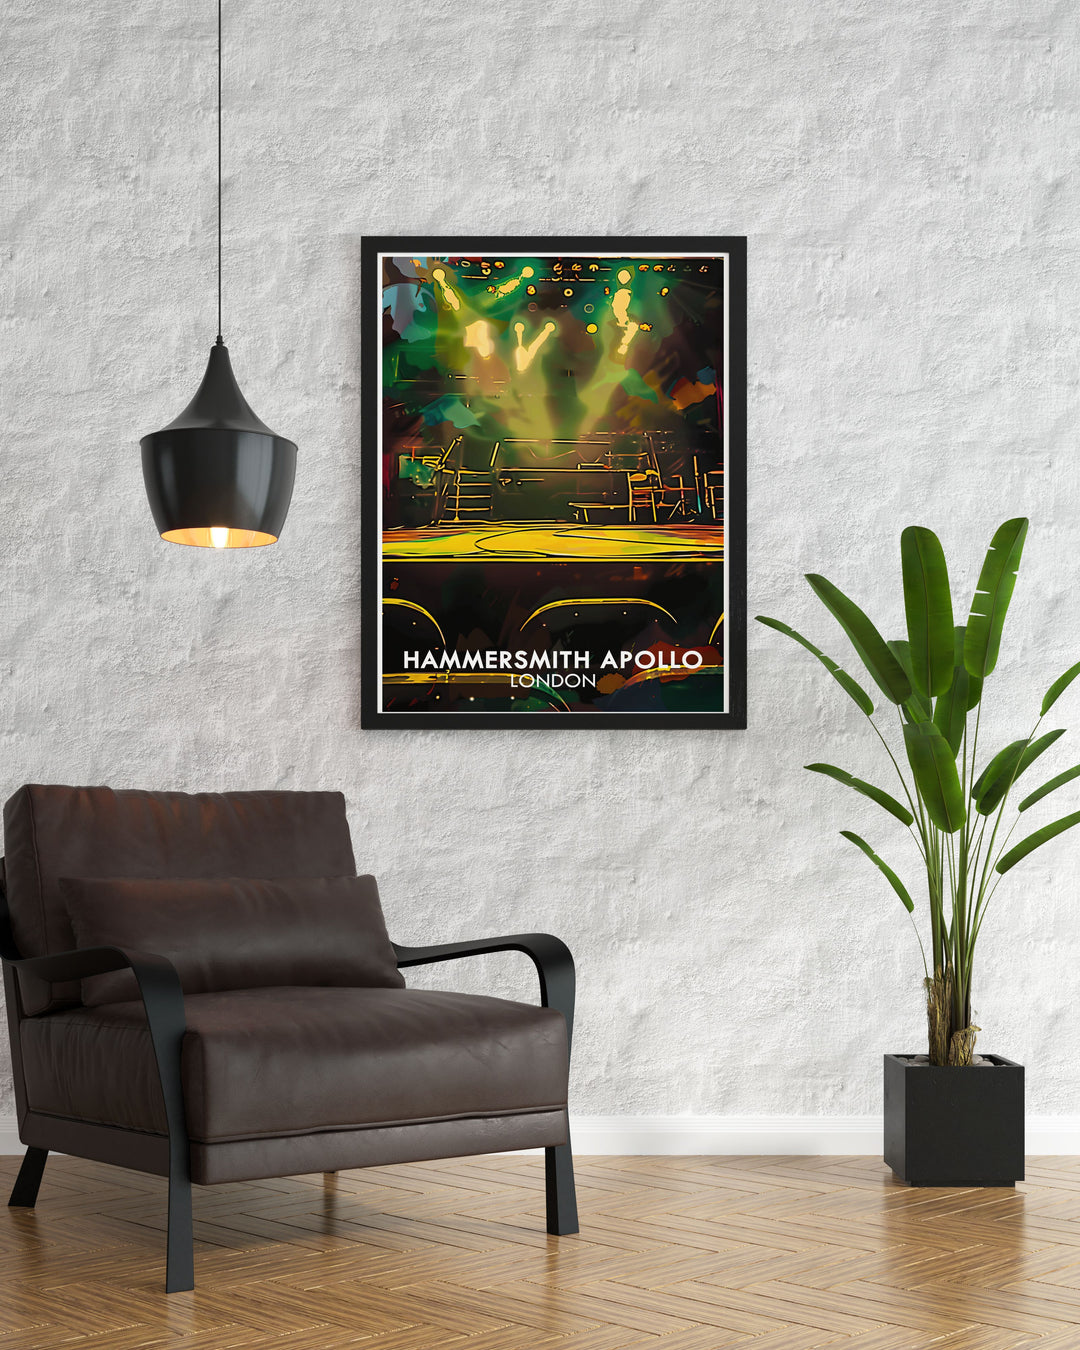 Highlighting the cultural vibrancy of Hammersmith Apollo, this travel poster captures the essence of the historic venue and its role in Londons entertainment scene.